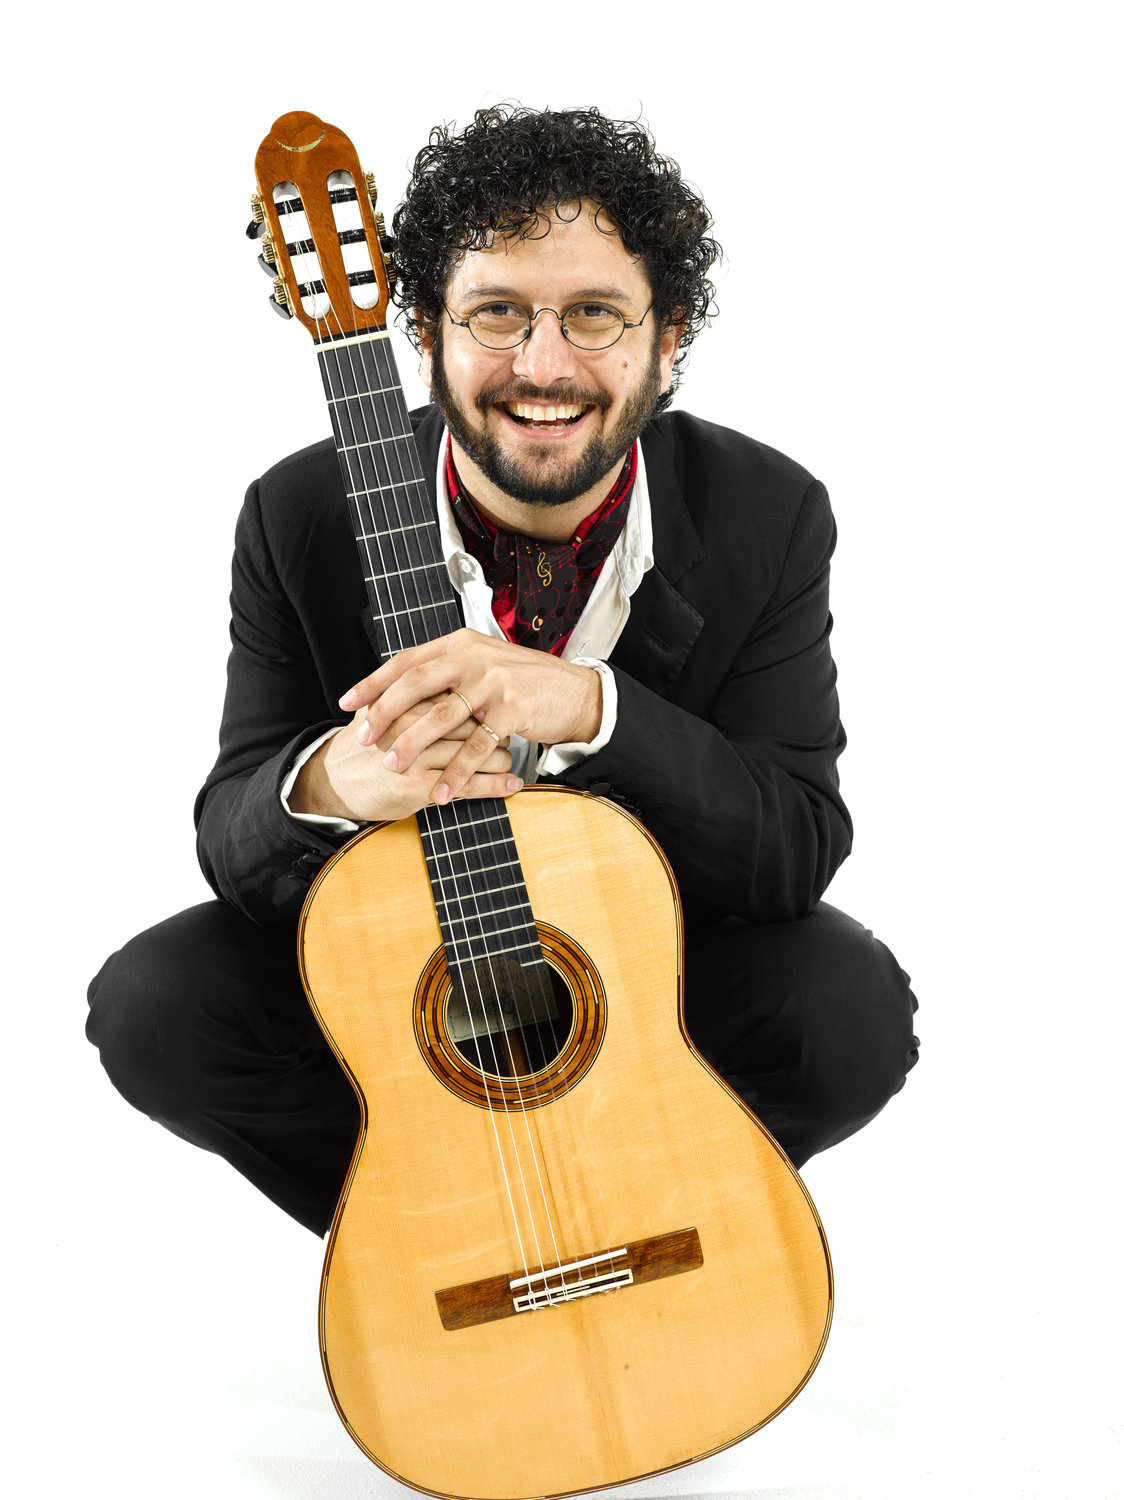 Aaron Larget-Caplan will perform two concerts at 4:30 and 7:30 p.m. May 27, at the Kirkland Art Center in Clinton.